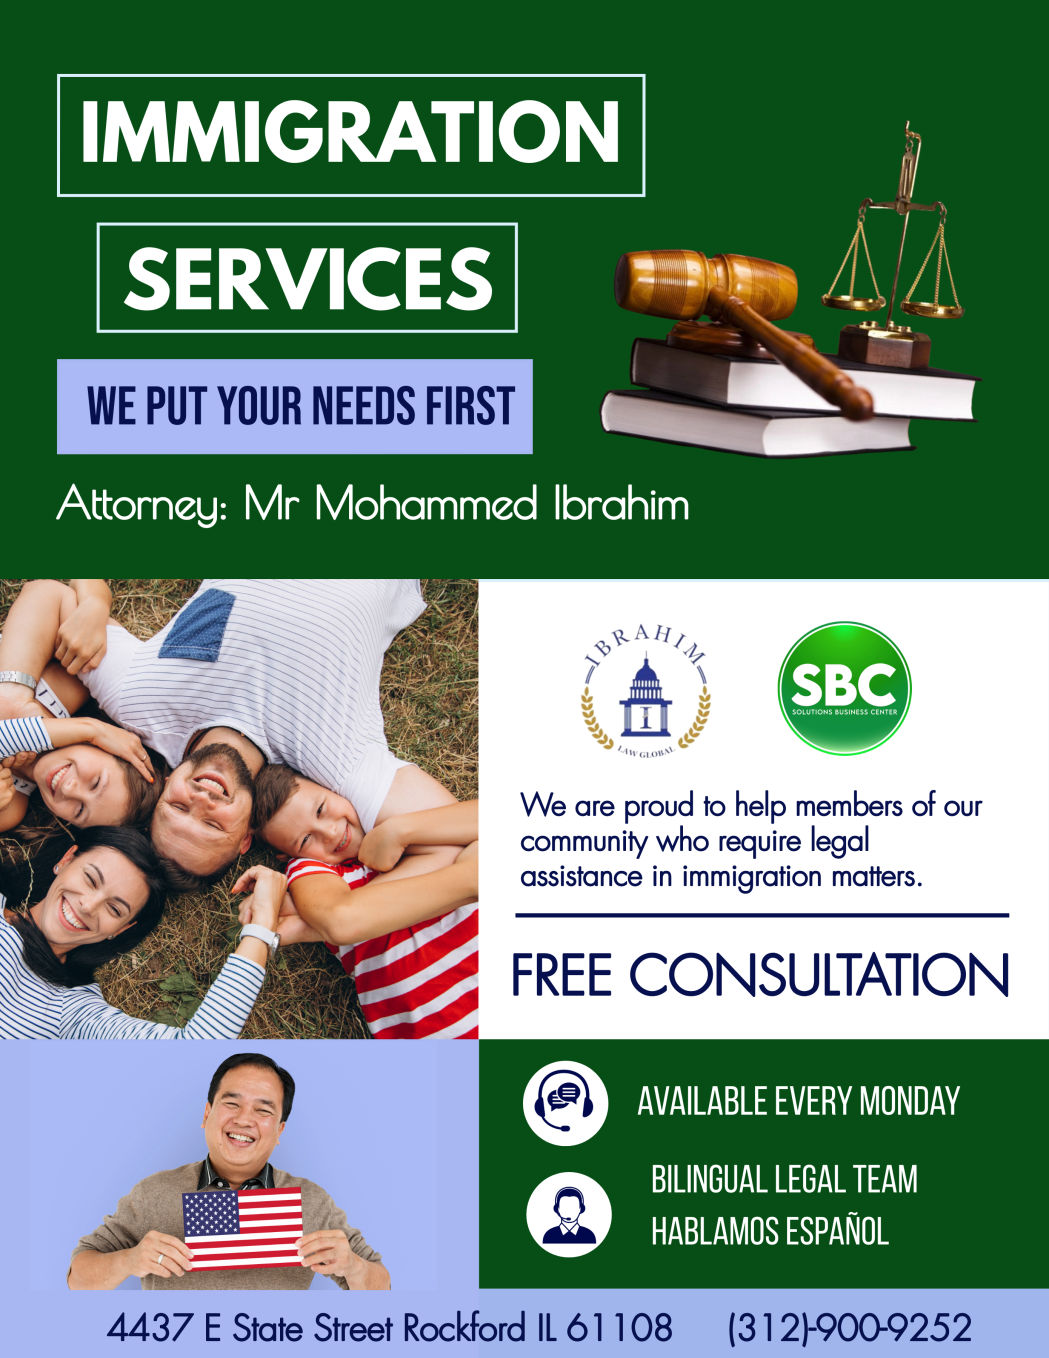 Immigration Services free consultation flyer